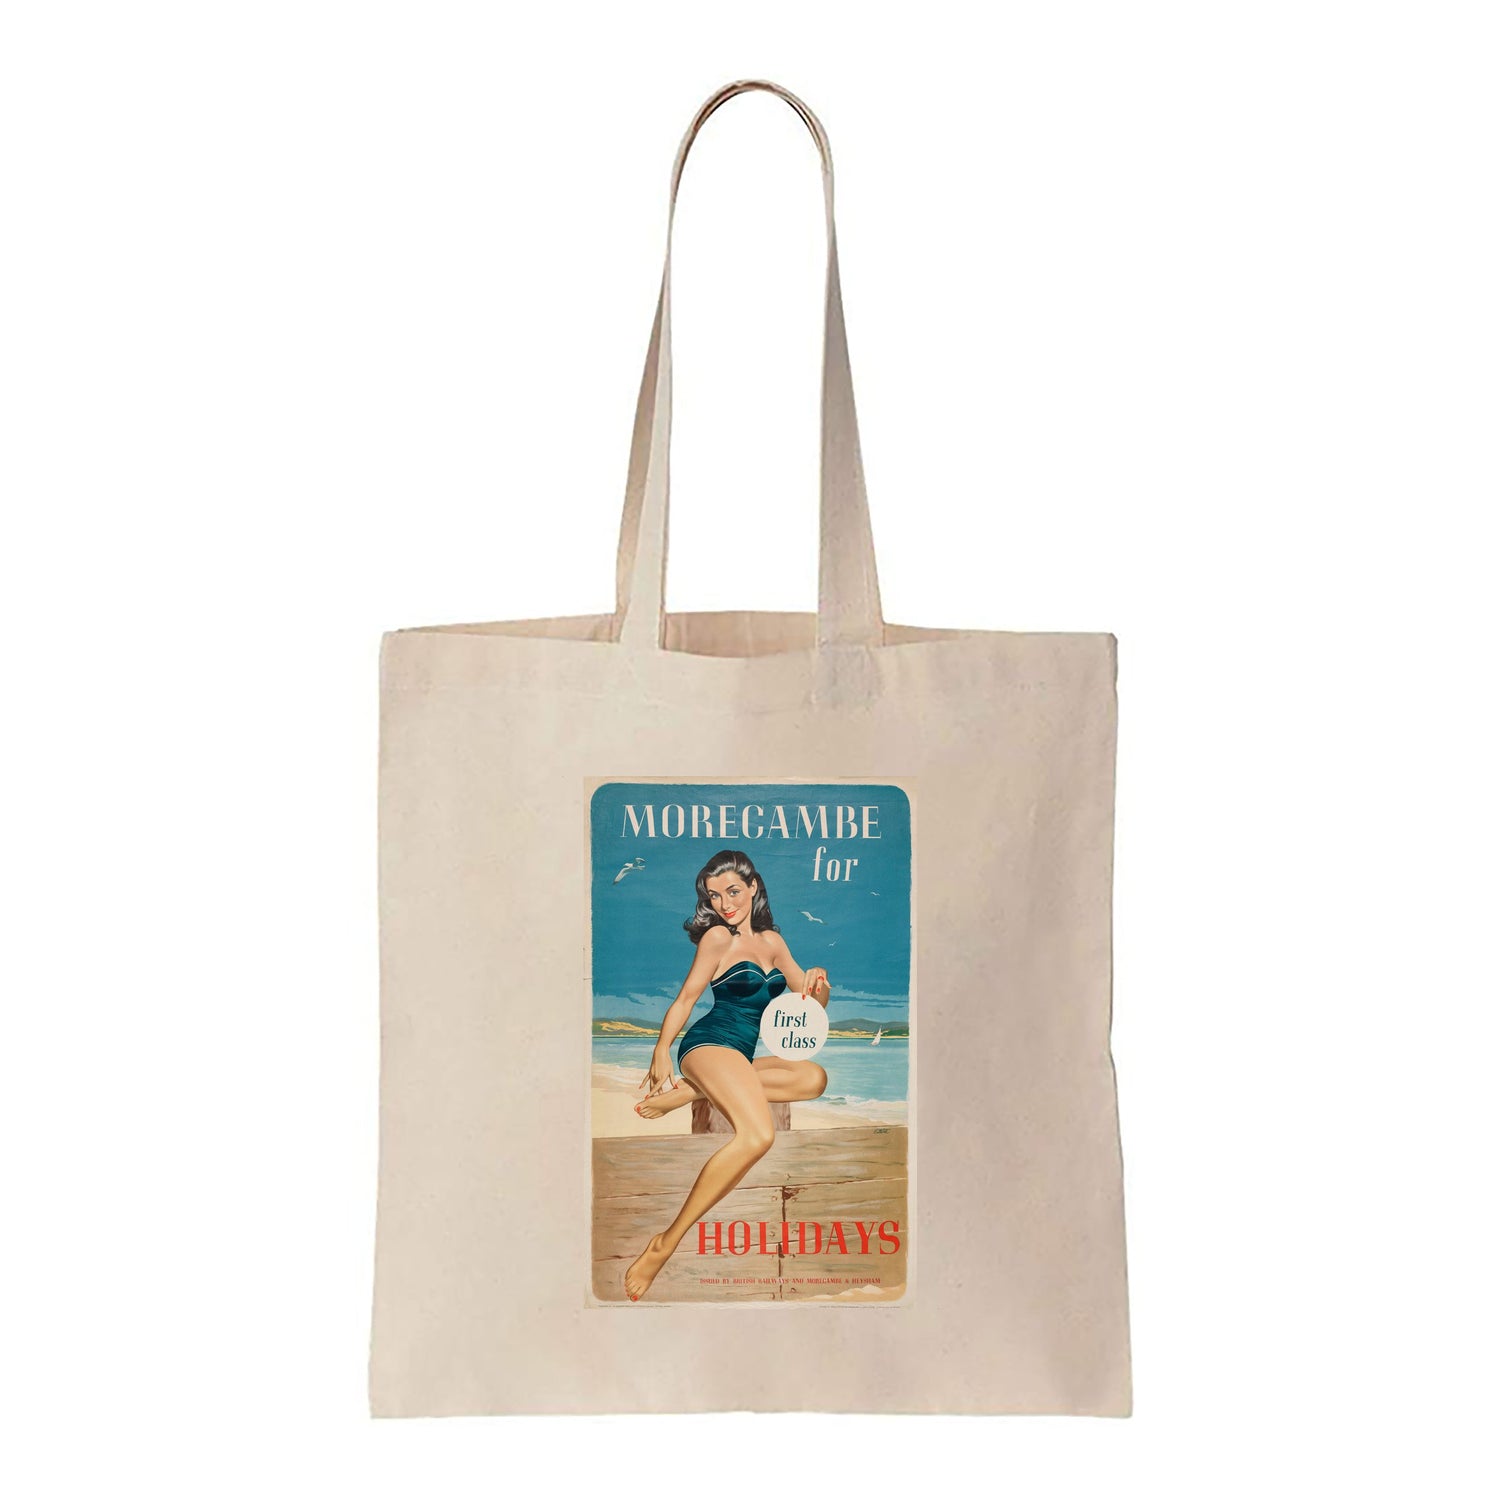 Morecambe for Holidays - 'First Class' - Canvas Tote Bag